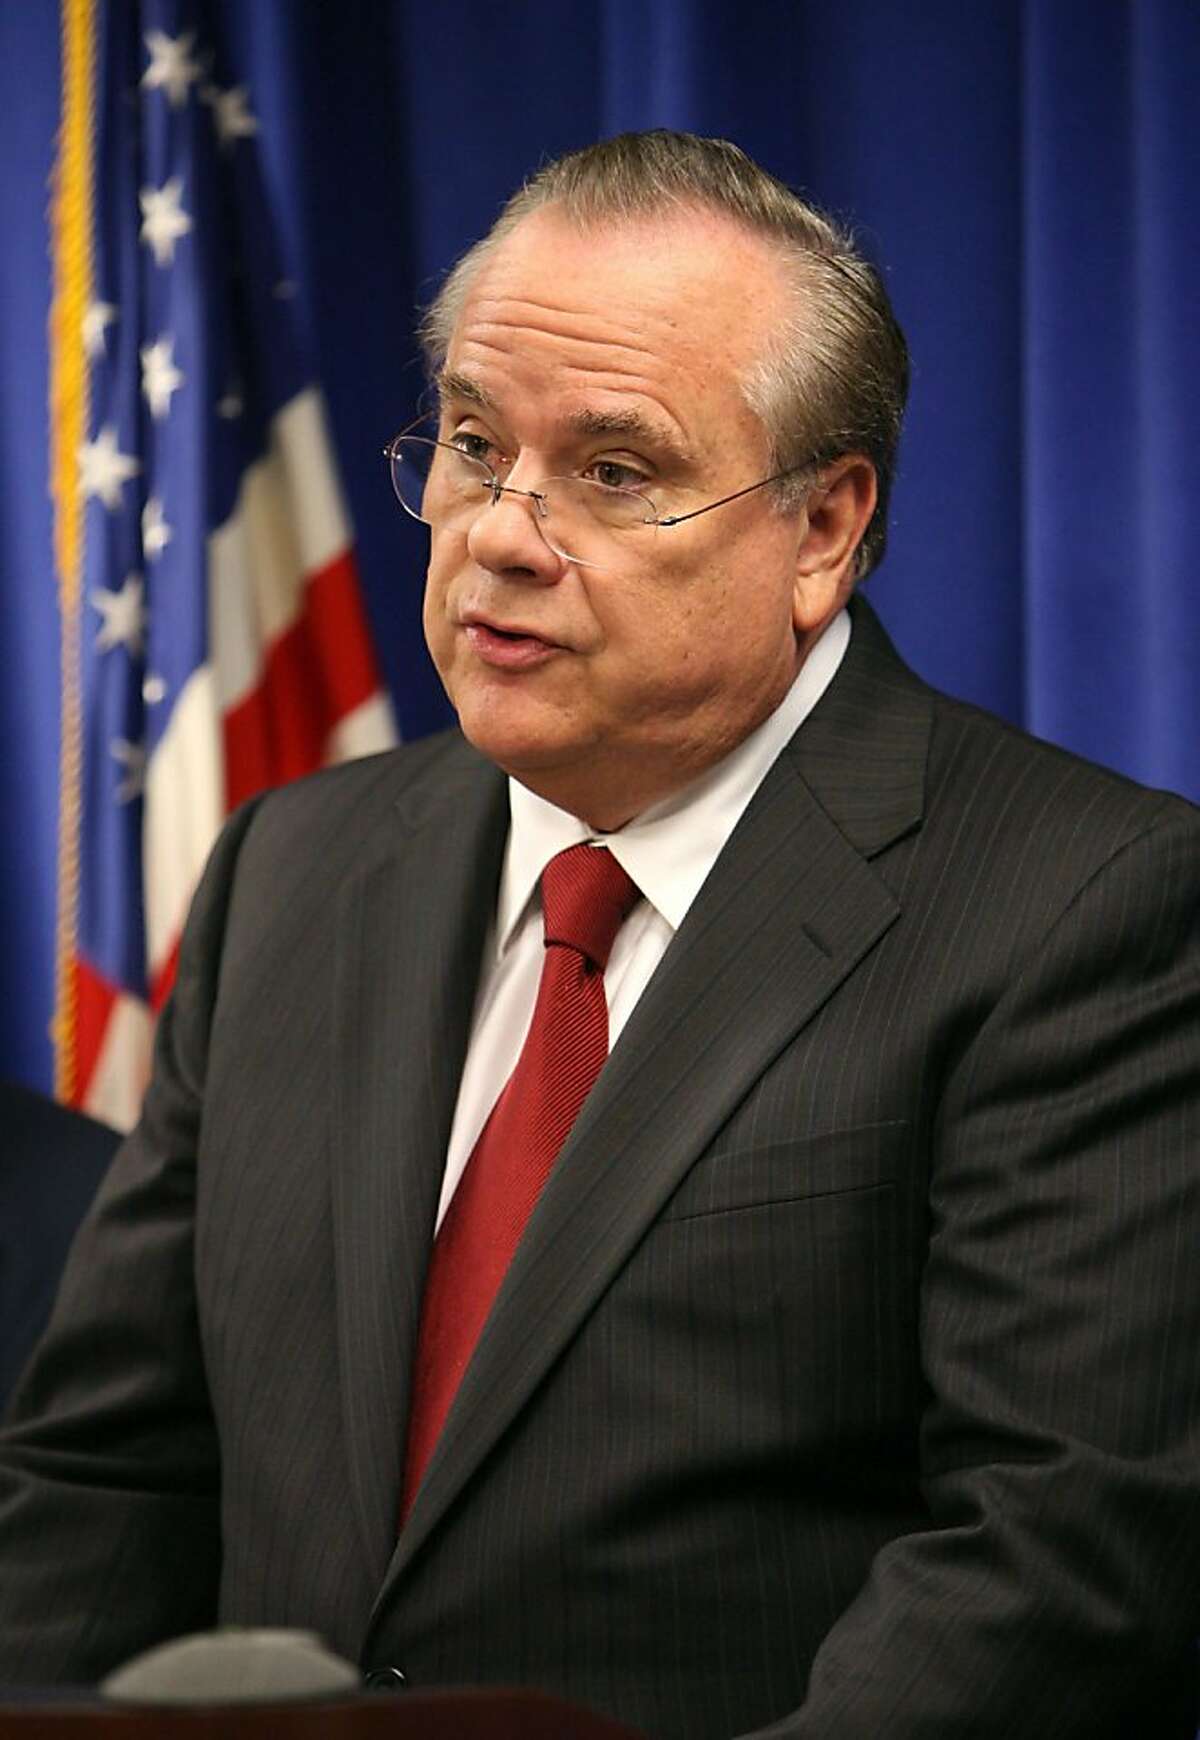 Attorney General Bill Lockyer announces that felony charges have been brought against Hewlet Packard former chairwoman Patricia Dunn and four others for corporate spying durning a news conference in Sacramento, calif., on Wednesday, Oct. 4, 2006.(Photo/Steve Yeater)